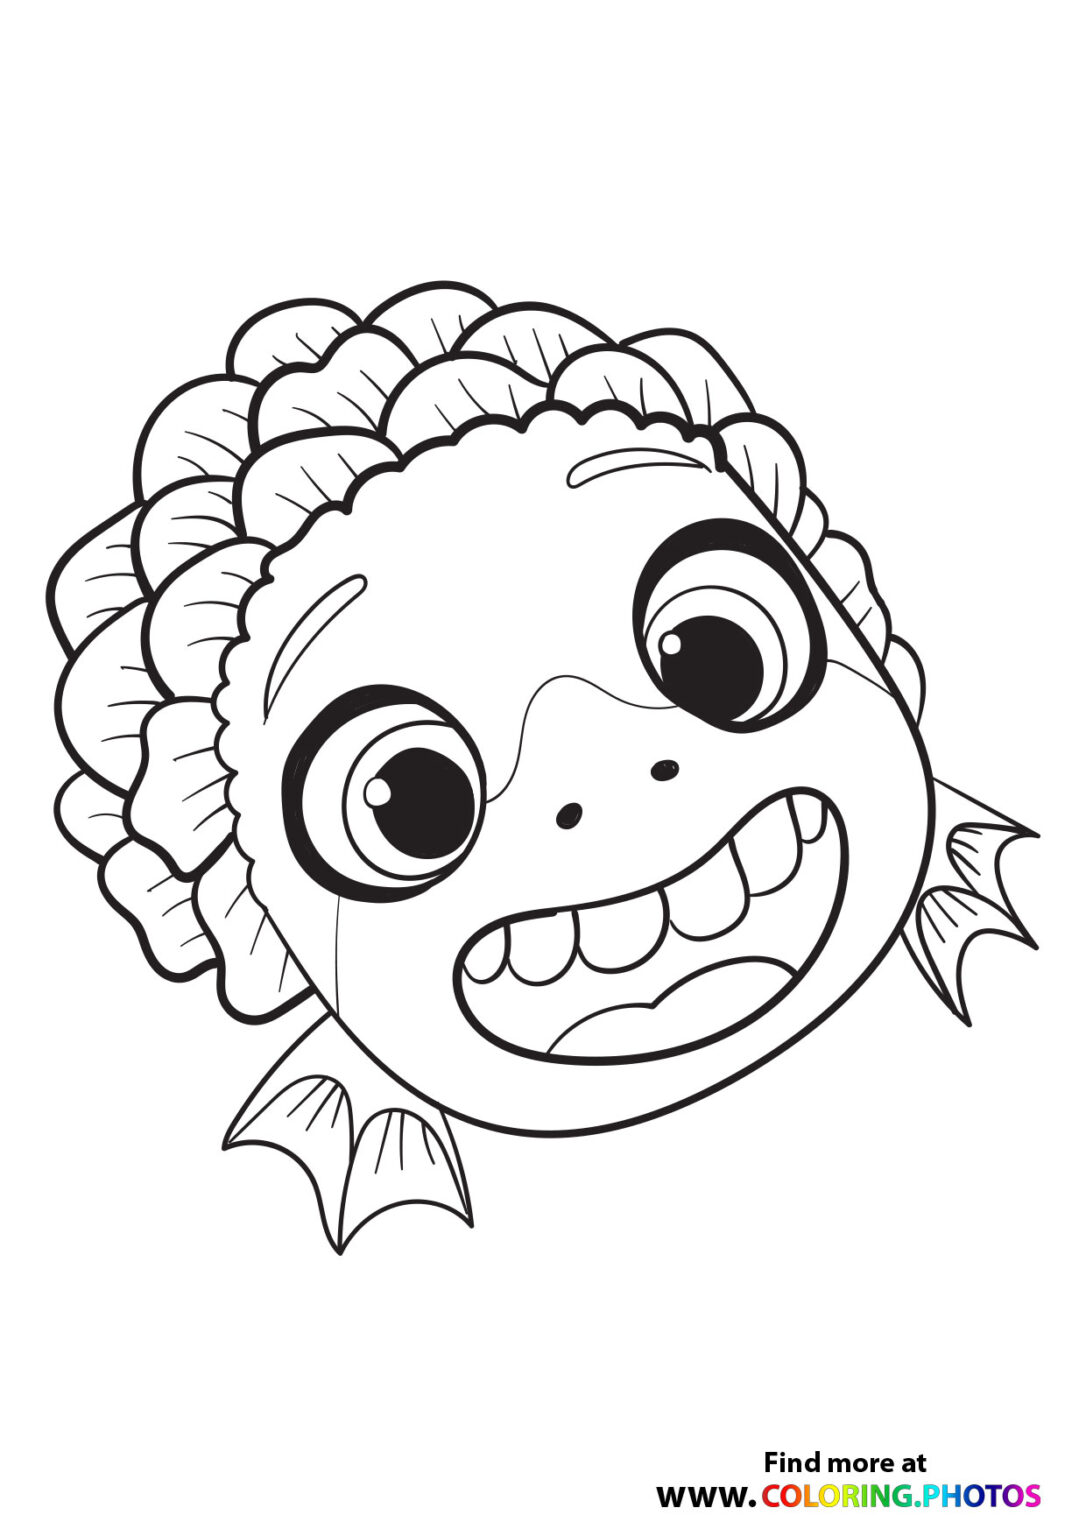 Silenzio Bruno! Disney Luca - Coloring Pages for kids